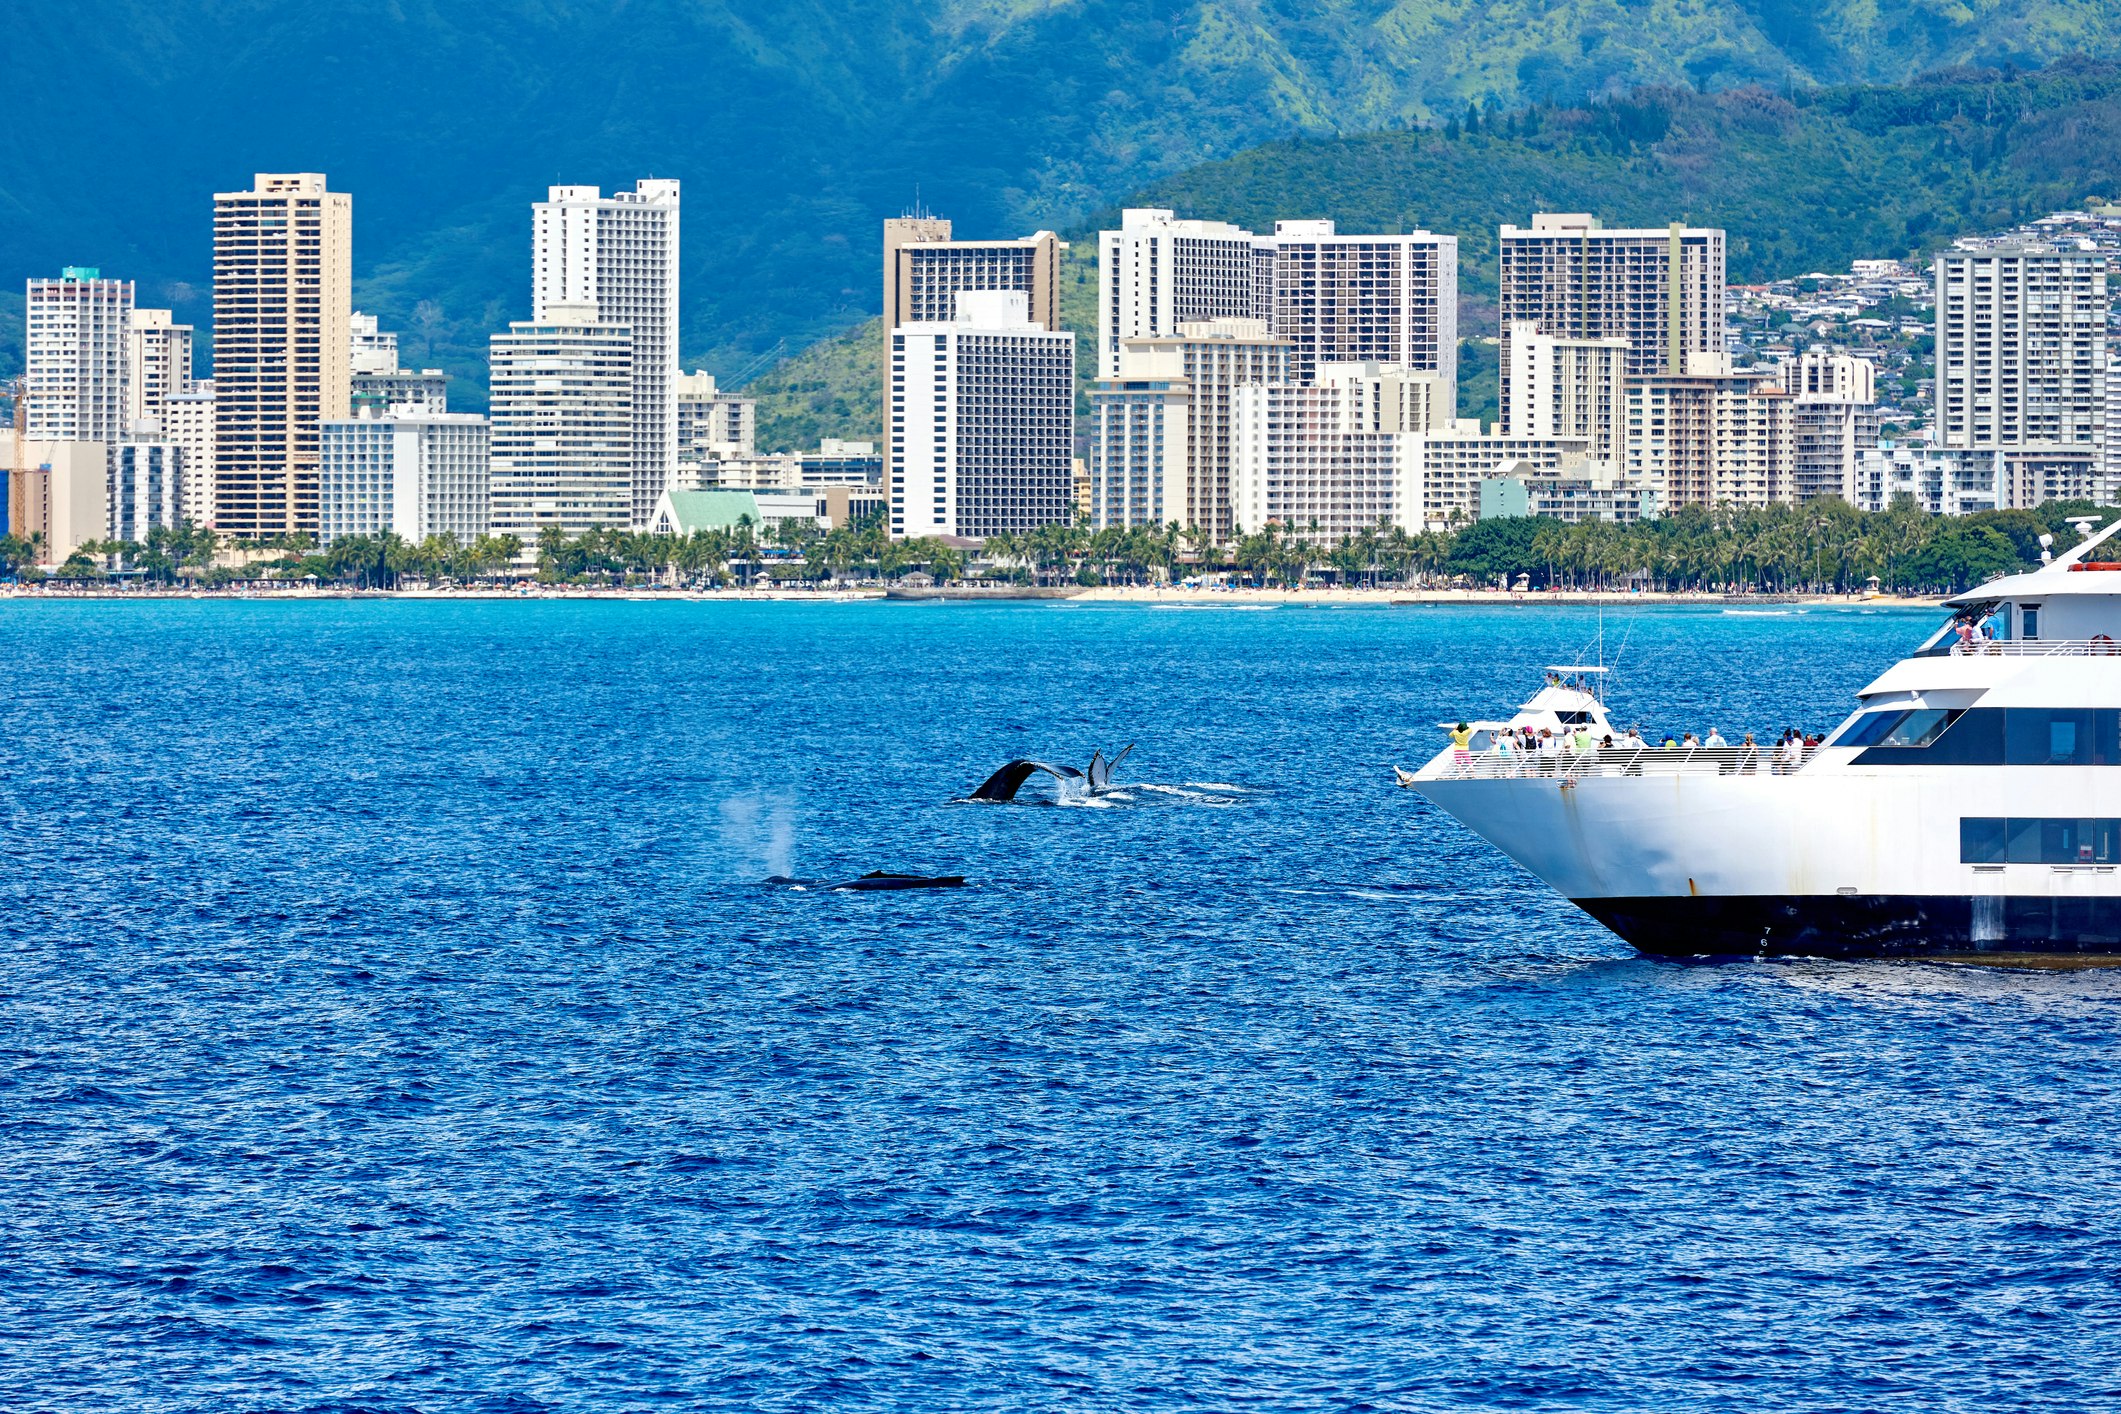 Two whales breach out of the water near a white tour boat. High-rise buildings line the coast in the background 